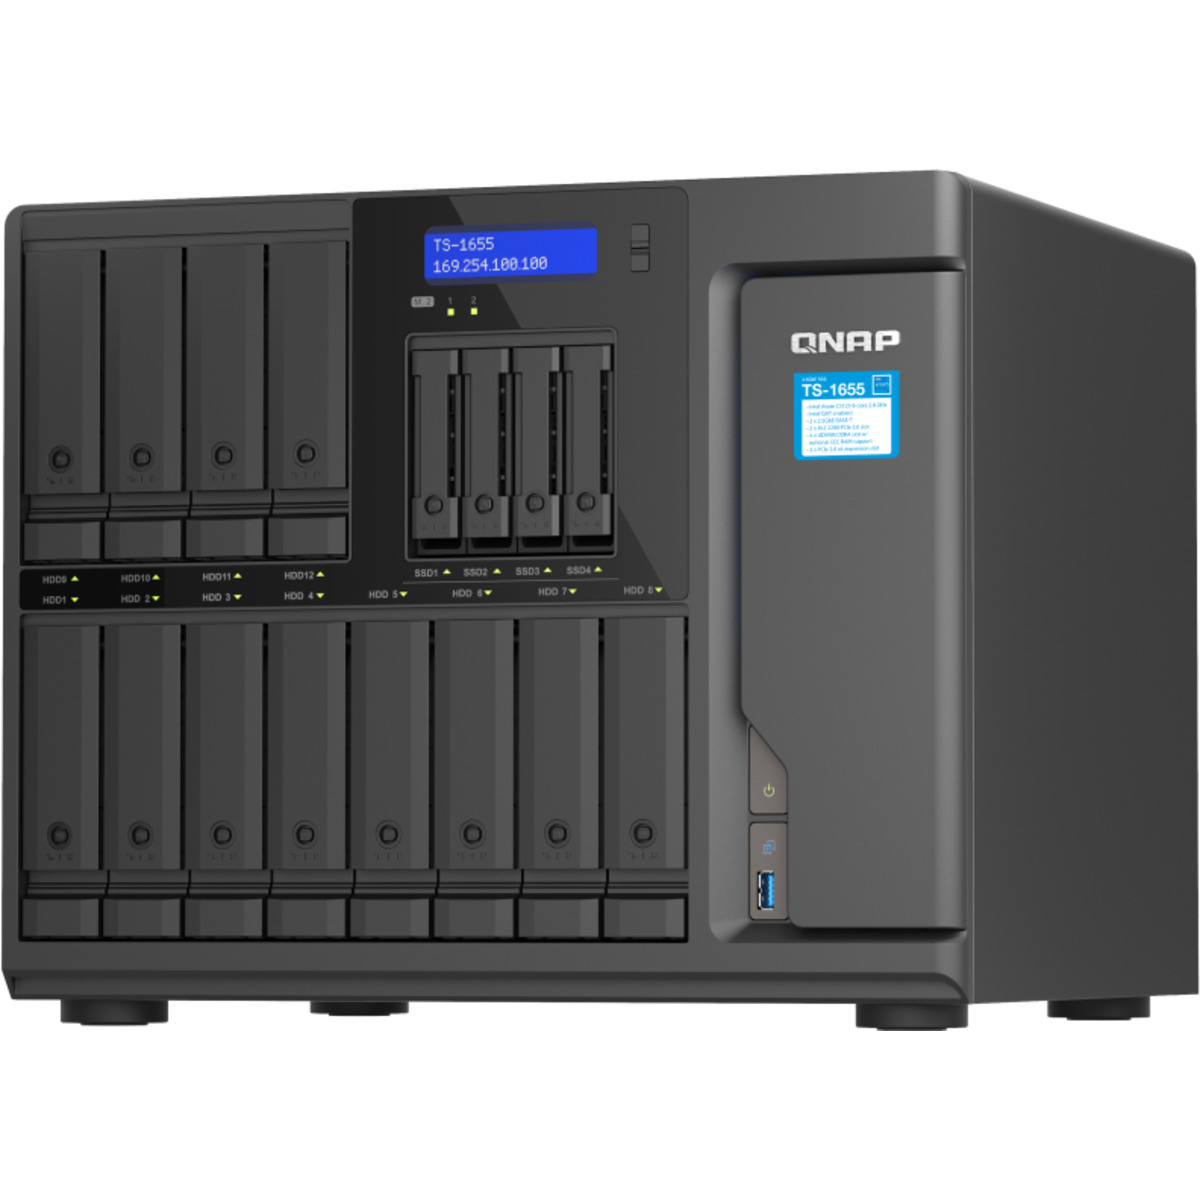 buy $7750 QNAP TS-1655 96tb Desktop NAS - Network Attached Storage Device 12x8000gb Samsung 870 QVO MZ-77Q8T0 2.5 560/530MB/s SATA 6Gb/s SSD CONSUMER Class Drives Installed - Burn-In Tested - ON SALE - FREE RAM UPGRADE - nas headquarters buy network attached storage server device das new raid-5 free shipping simply usa TS-1655